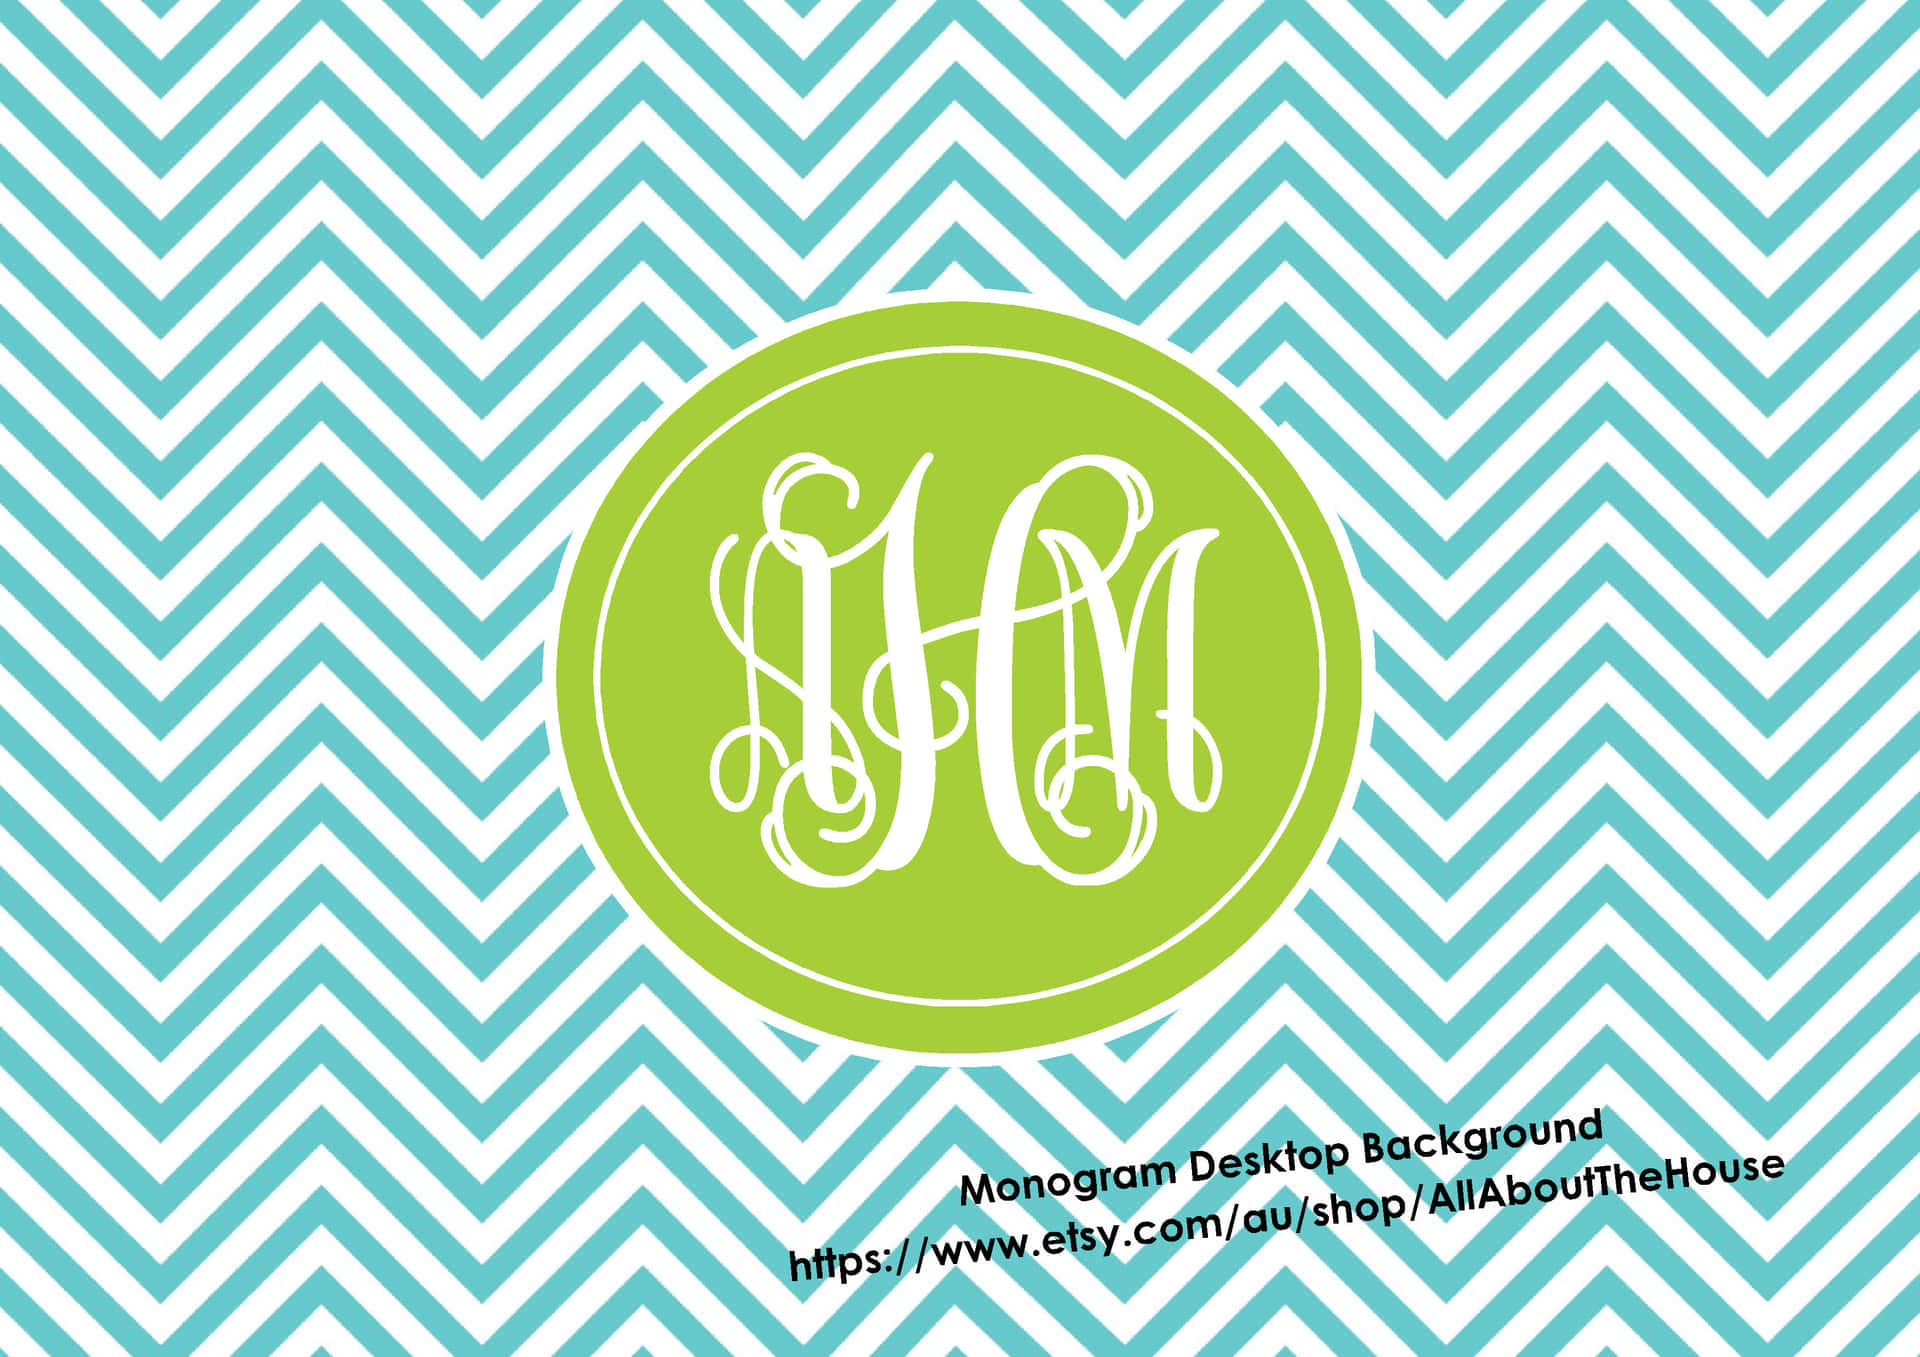 Try Monogram Desktop for a stylish new work experience Wallpaper